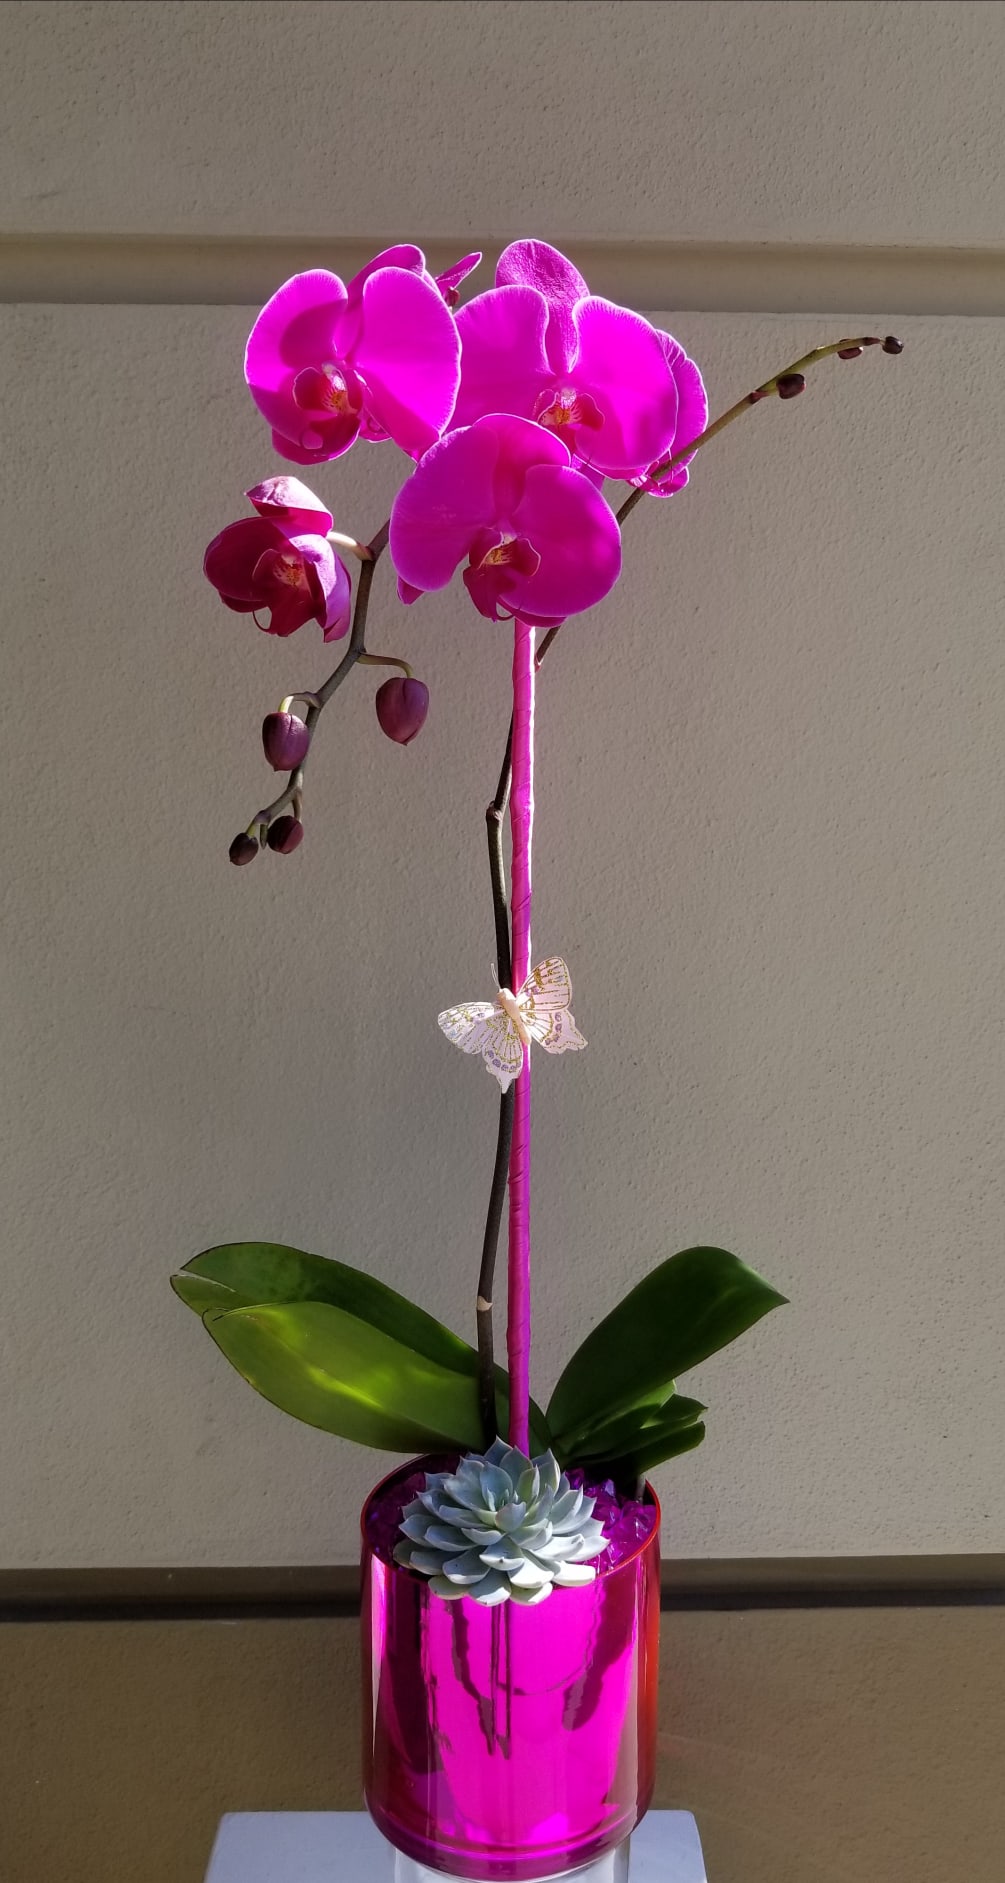 Purple orchid plant in a metallic hot pink vase.